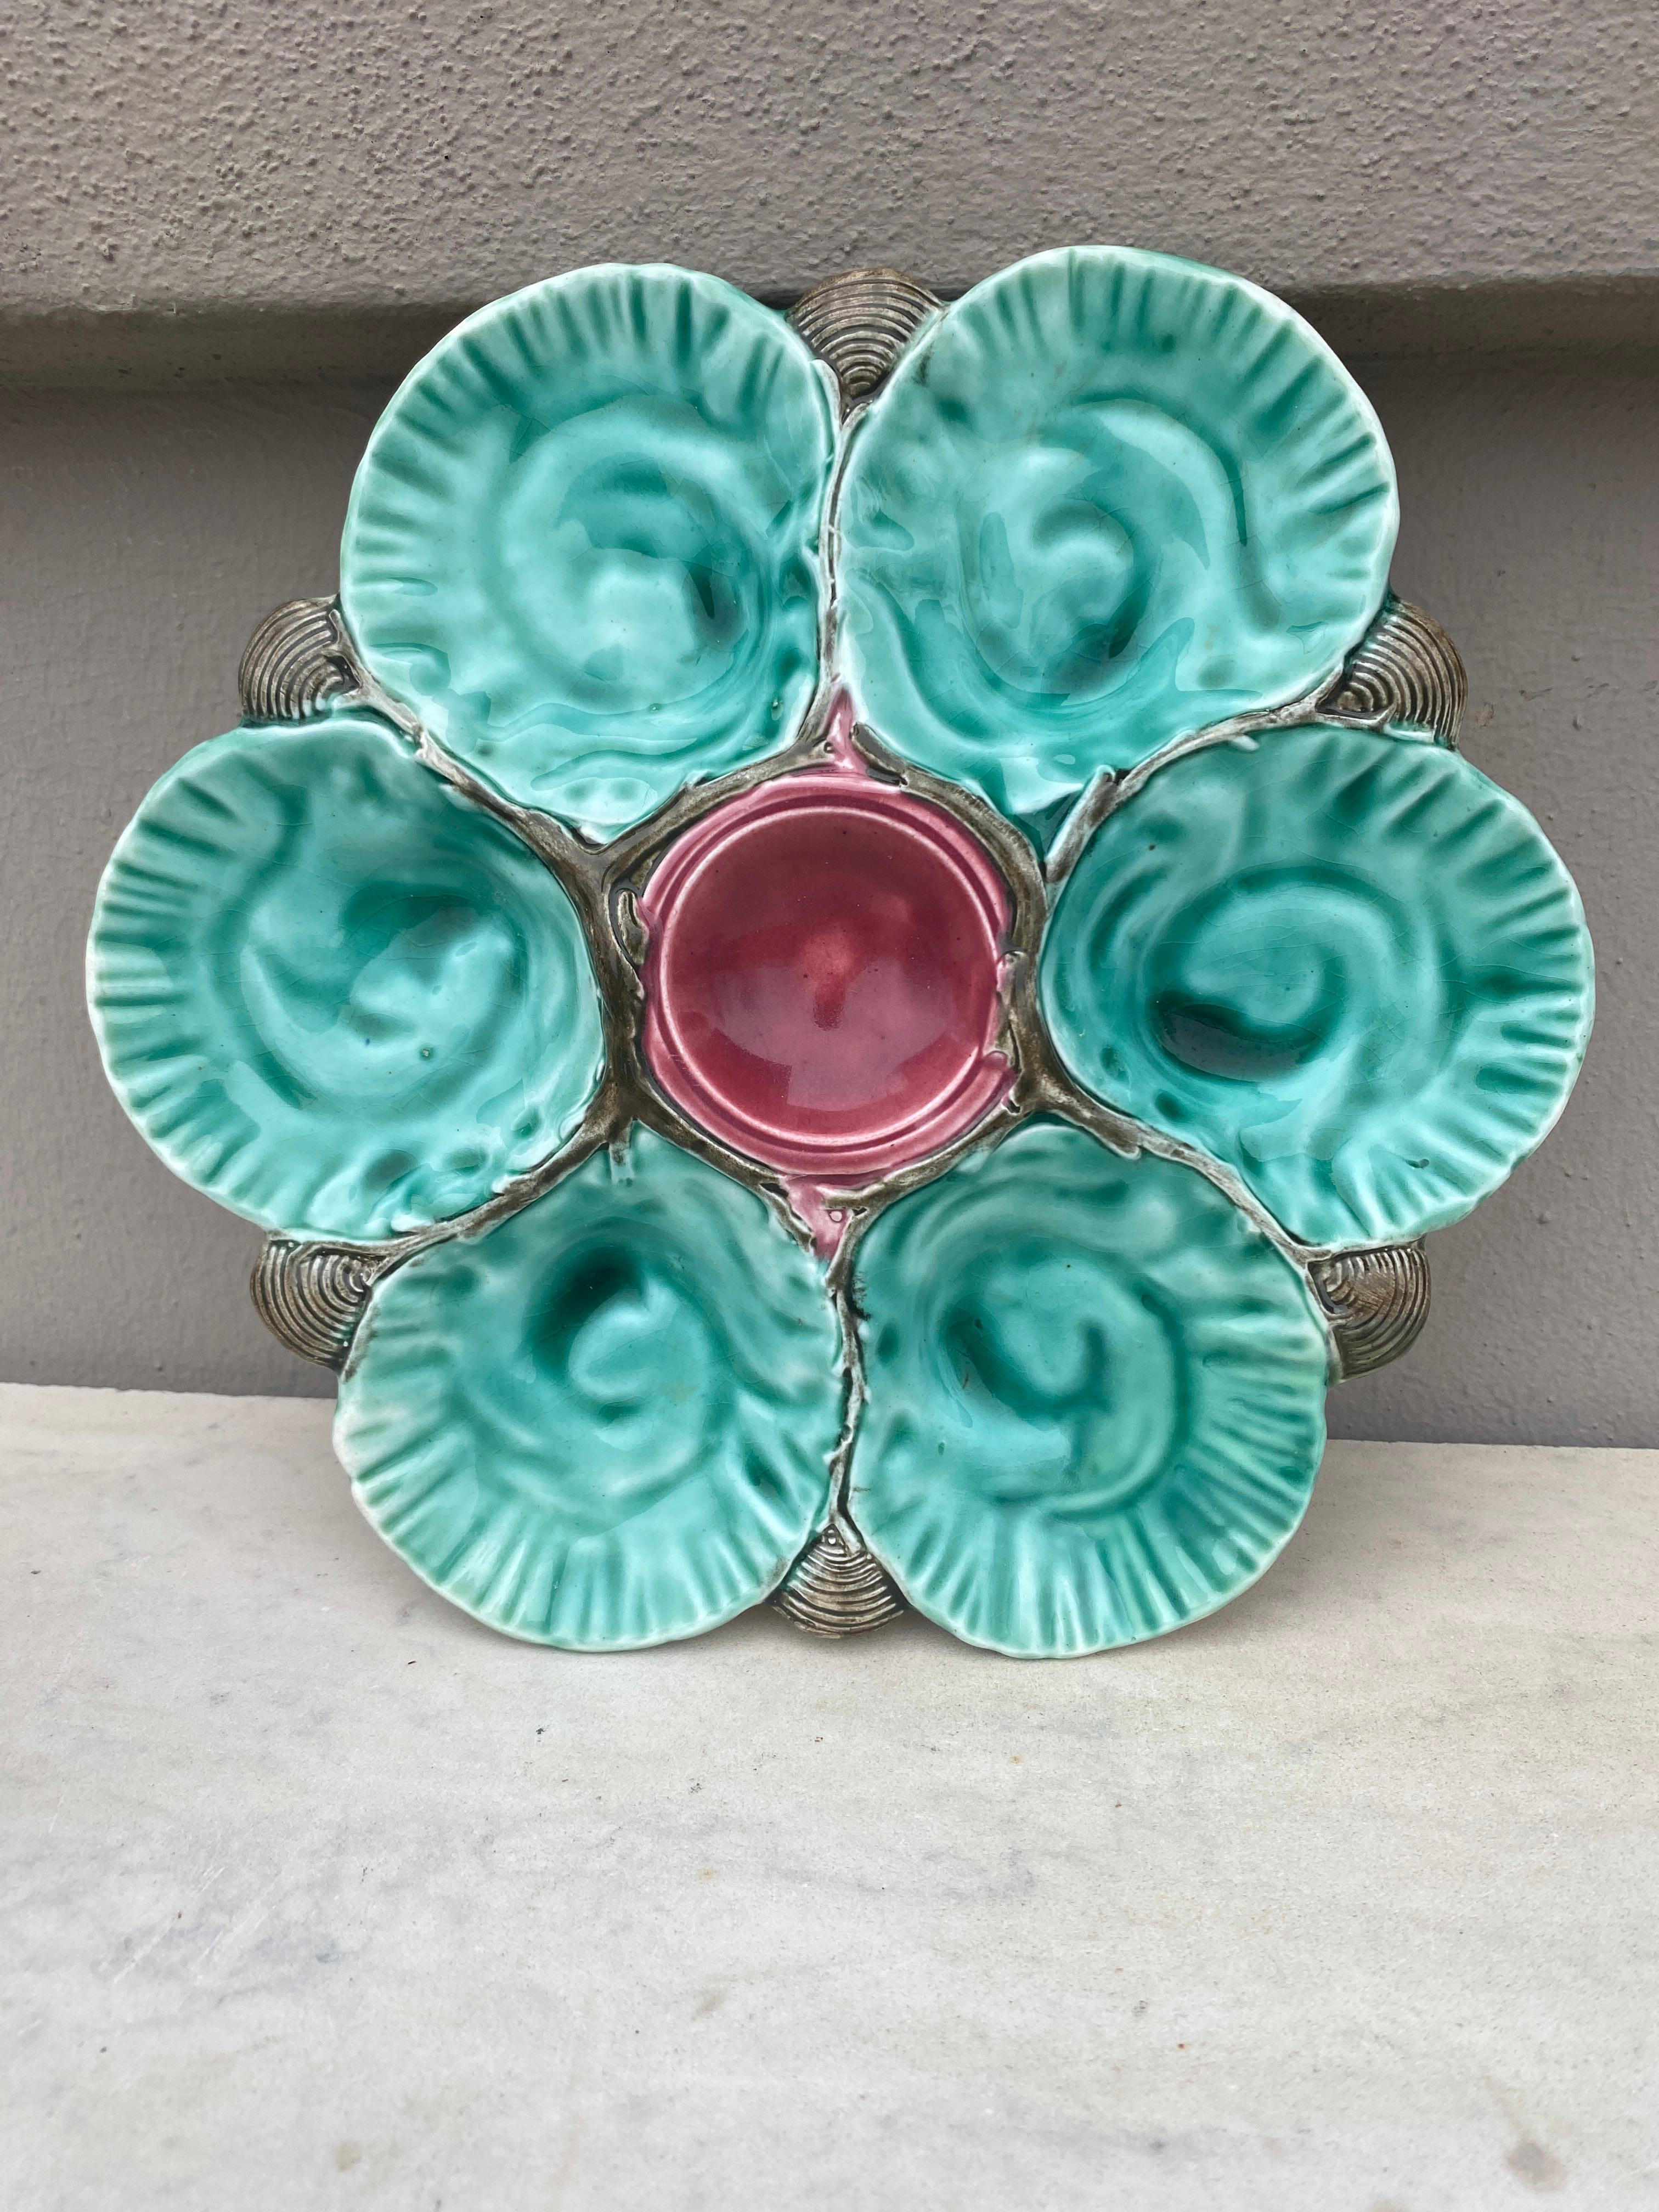 Colorful and rare Majolica oyster plate Choisy Le roi unsigned, circa 1890.
The six wells are blue between grey shells and the centre is pink.